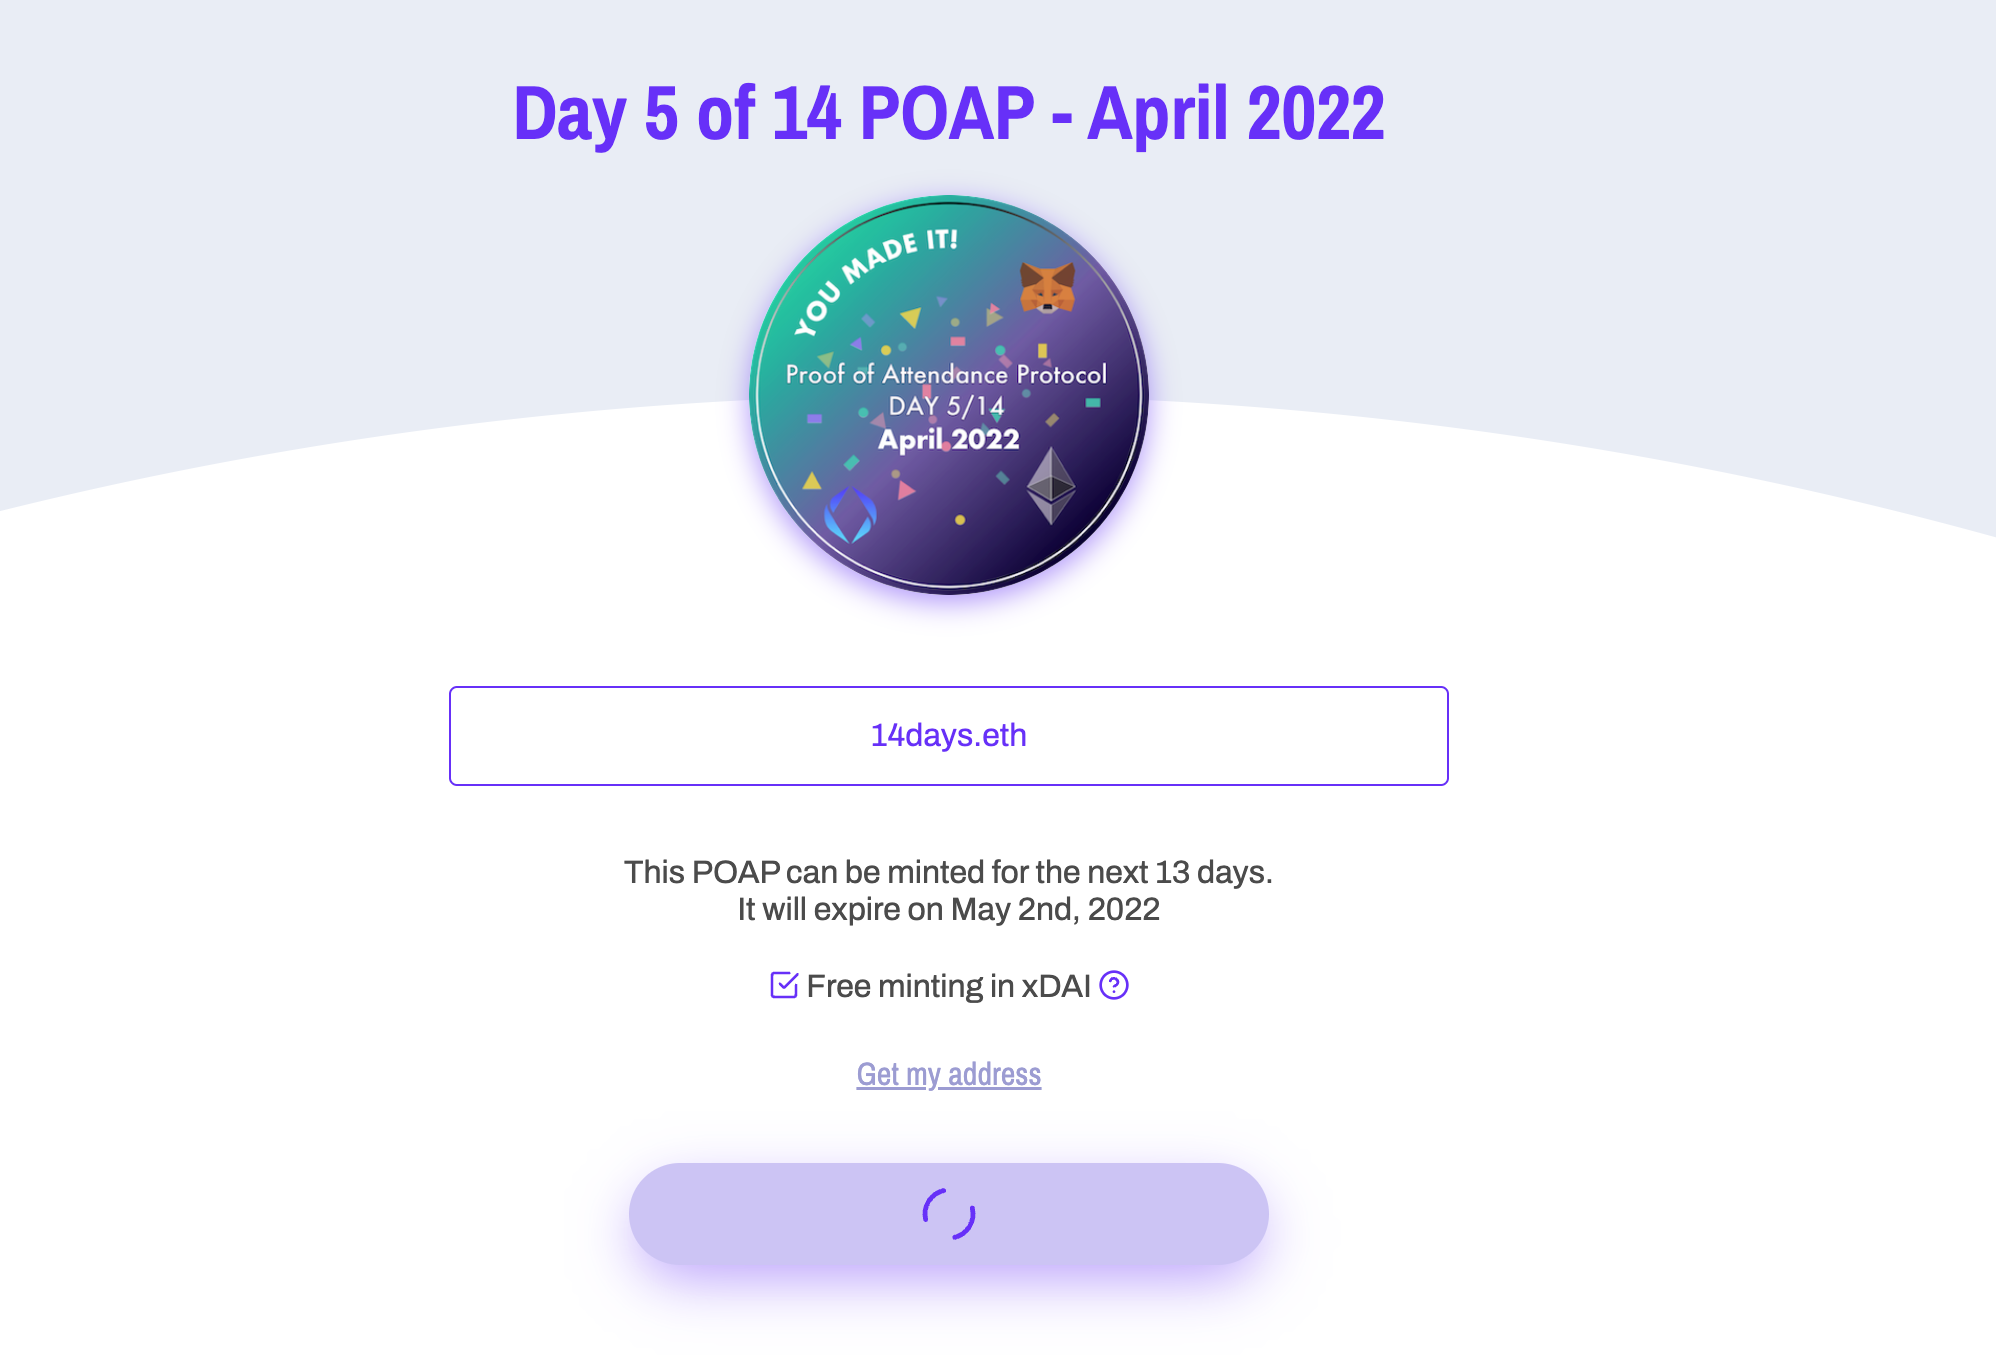 Your POAP can be claimed for free